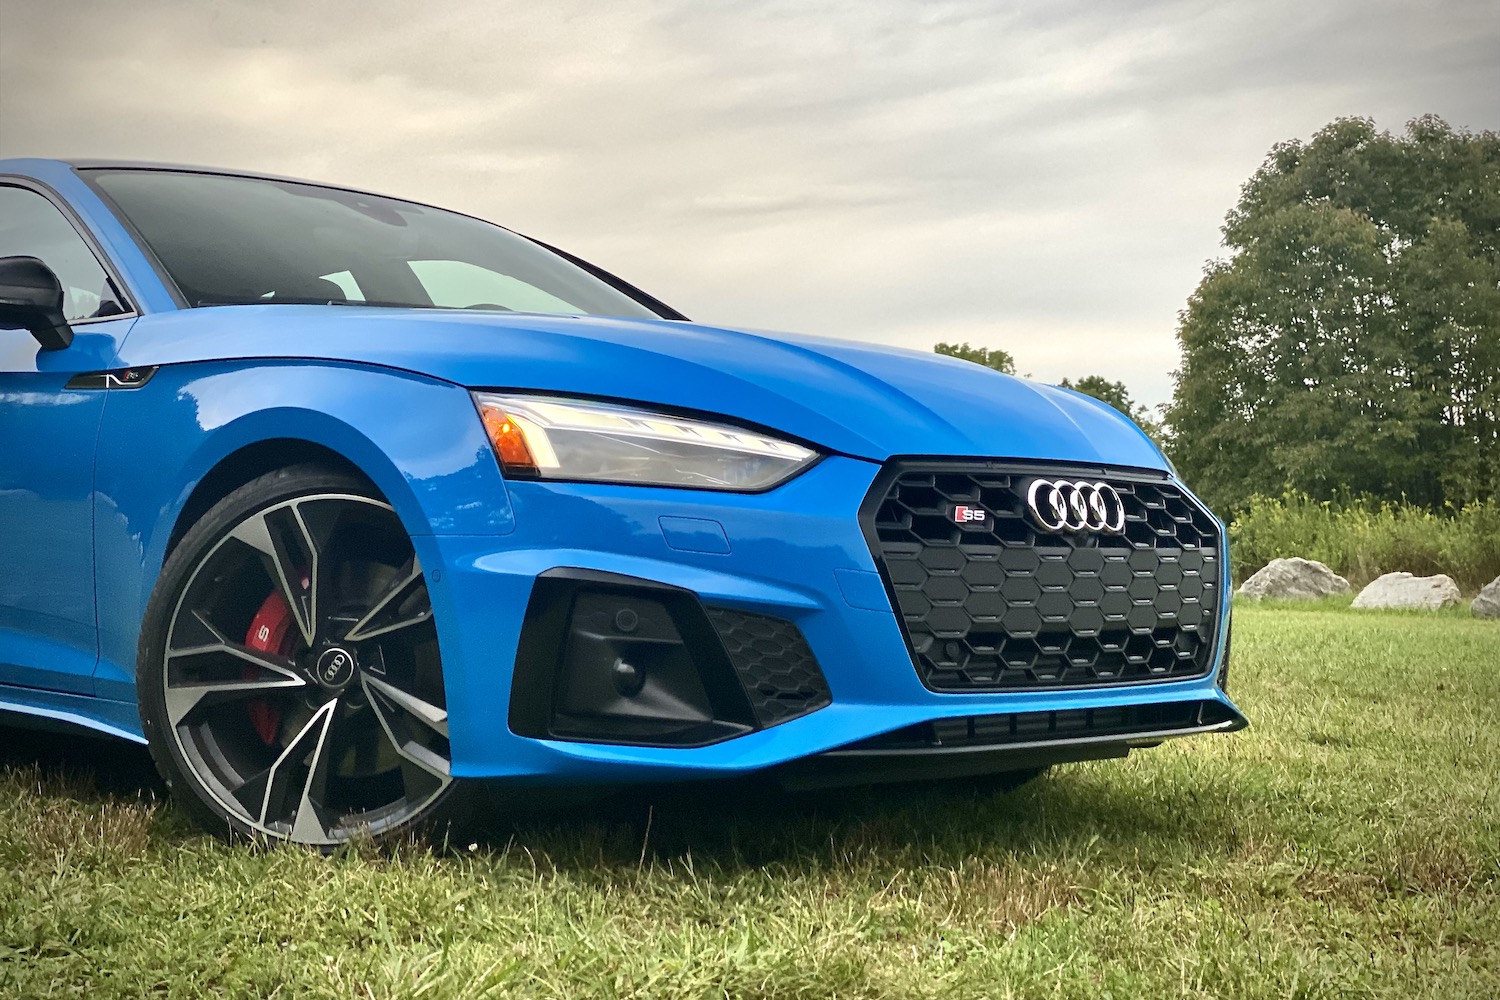 Front end angle of 2023 Audi S5 Sportback from passenger's side in a grassy field during sunset.